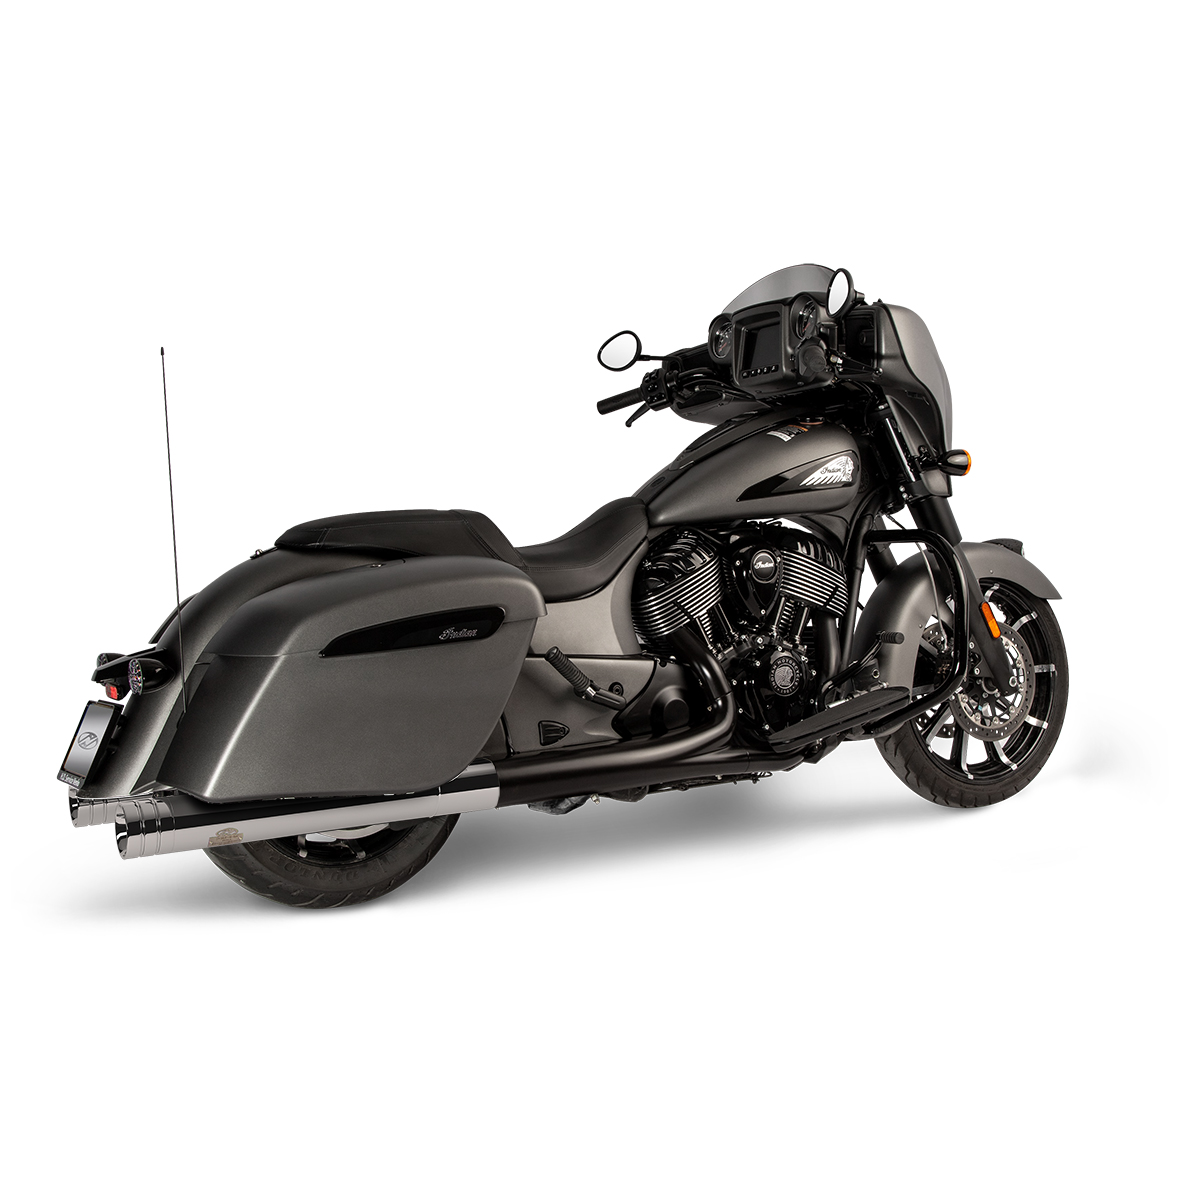 Jekill & Hyde Exhaust with Electronically Adjustable Noise Valve for 2020 Indian Chieftain 116CID Models, 2020 Indian Roadmaster 116CID Models & 2020 Indian Springfield 116CID Models